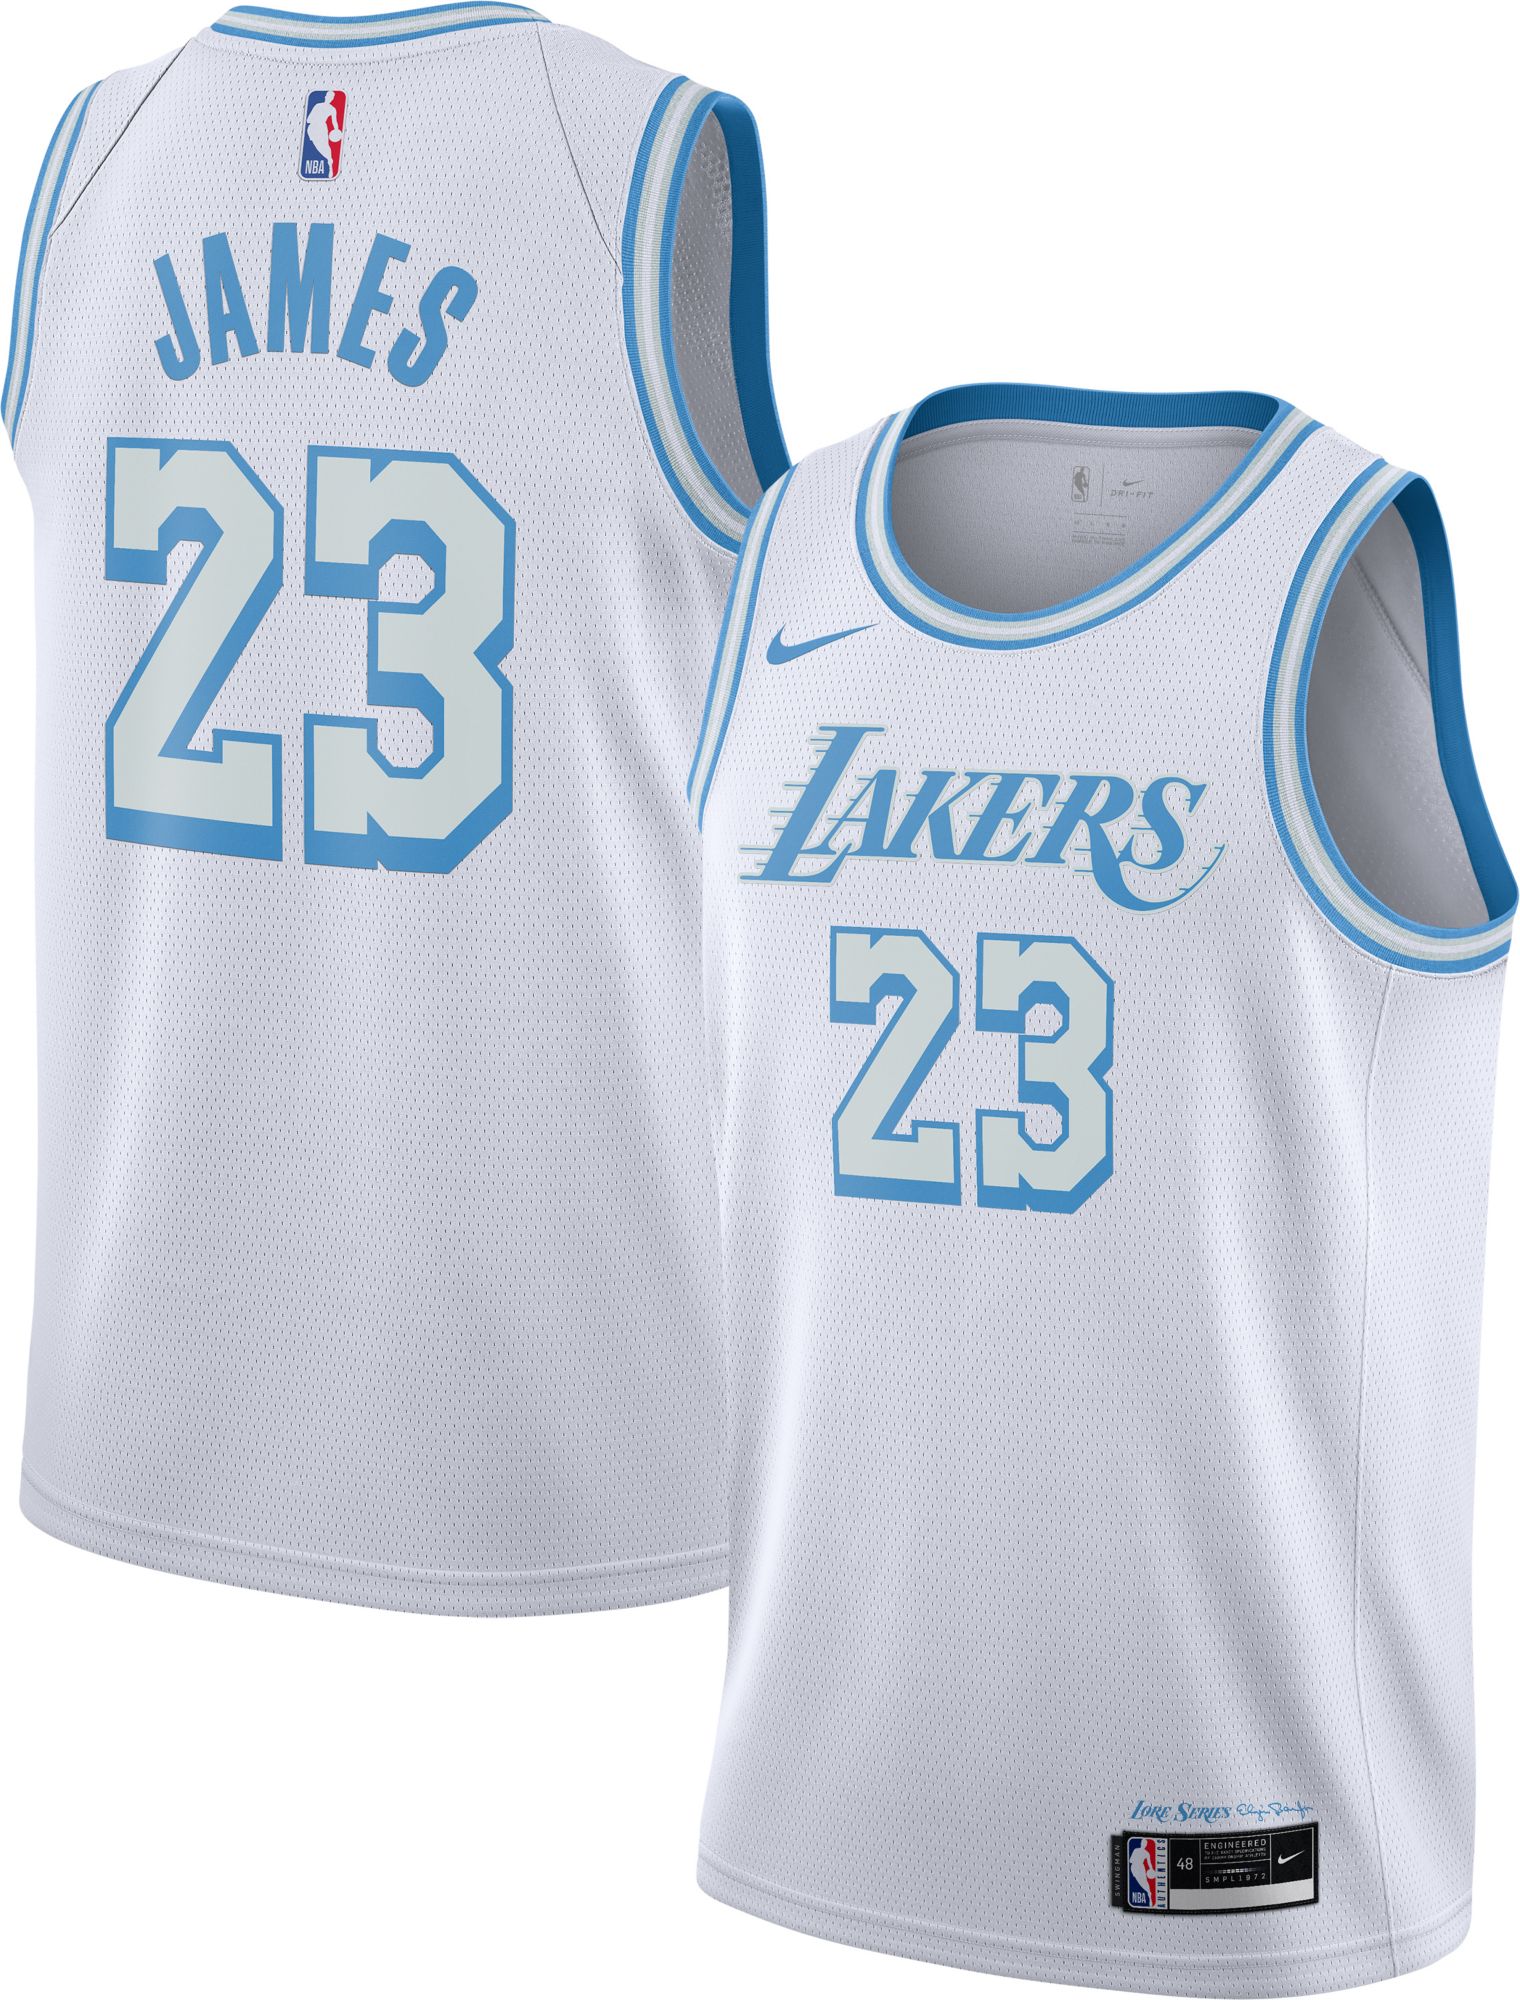 lakers jersey 23 james